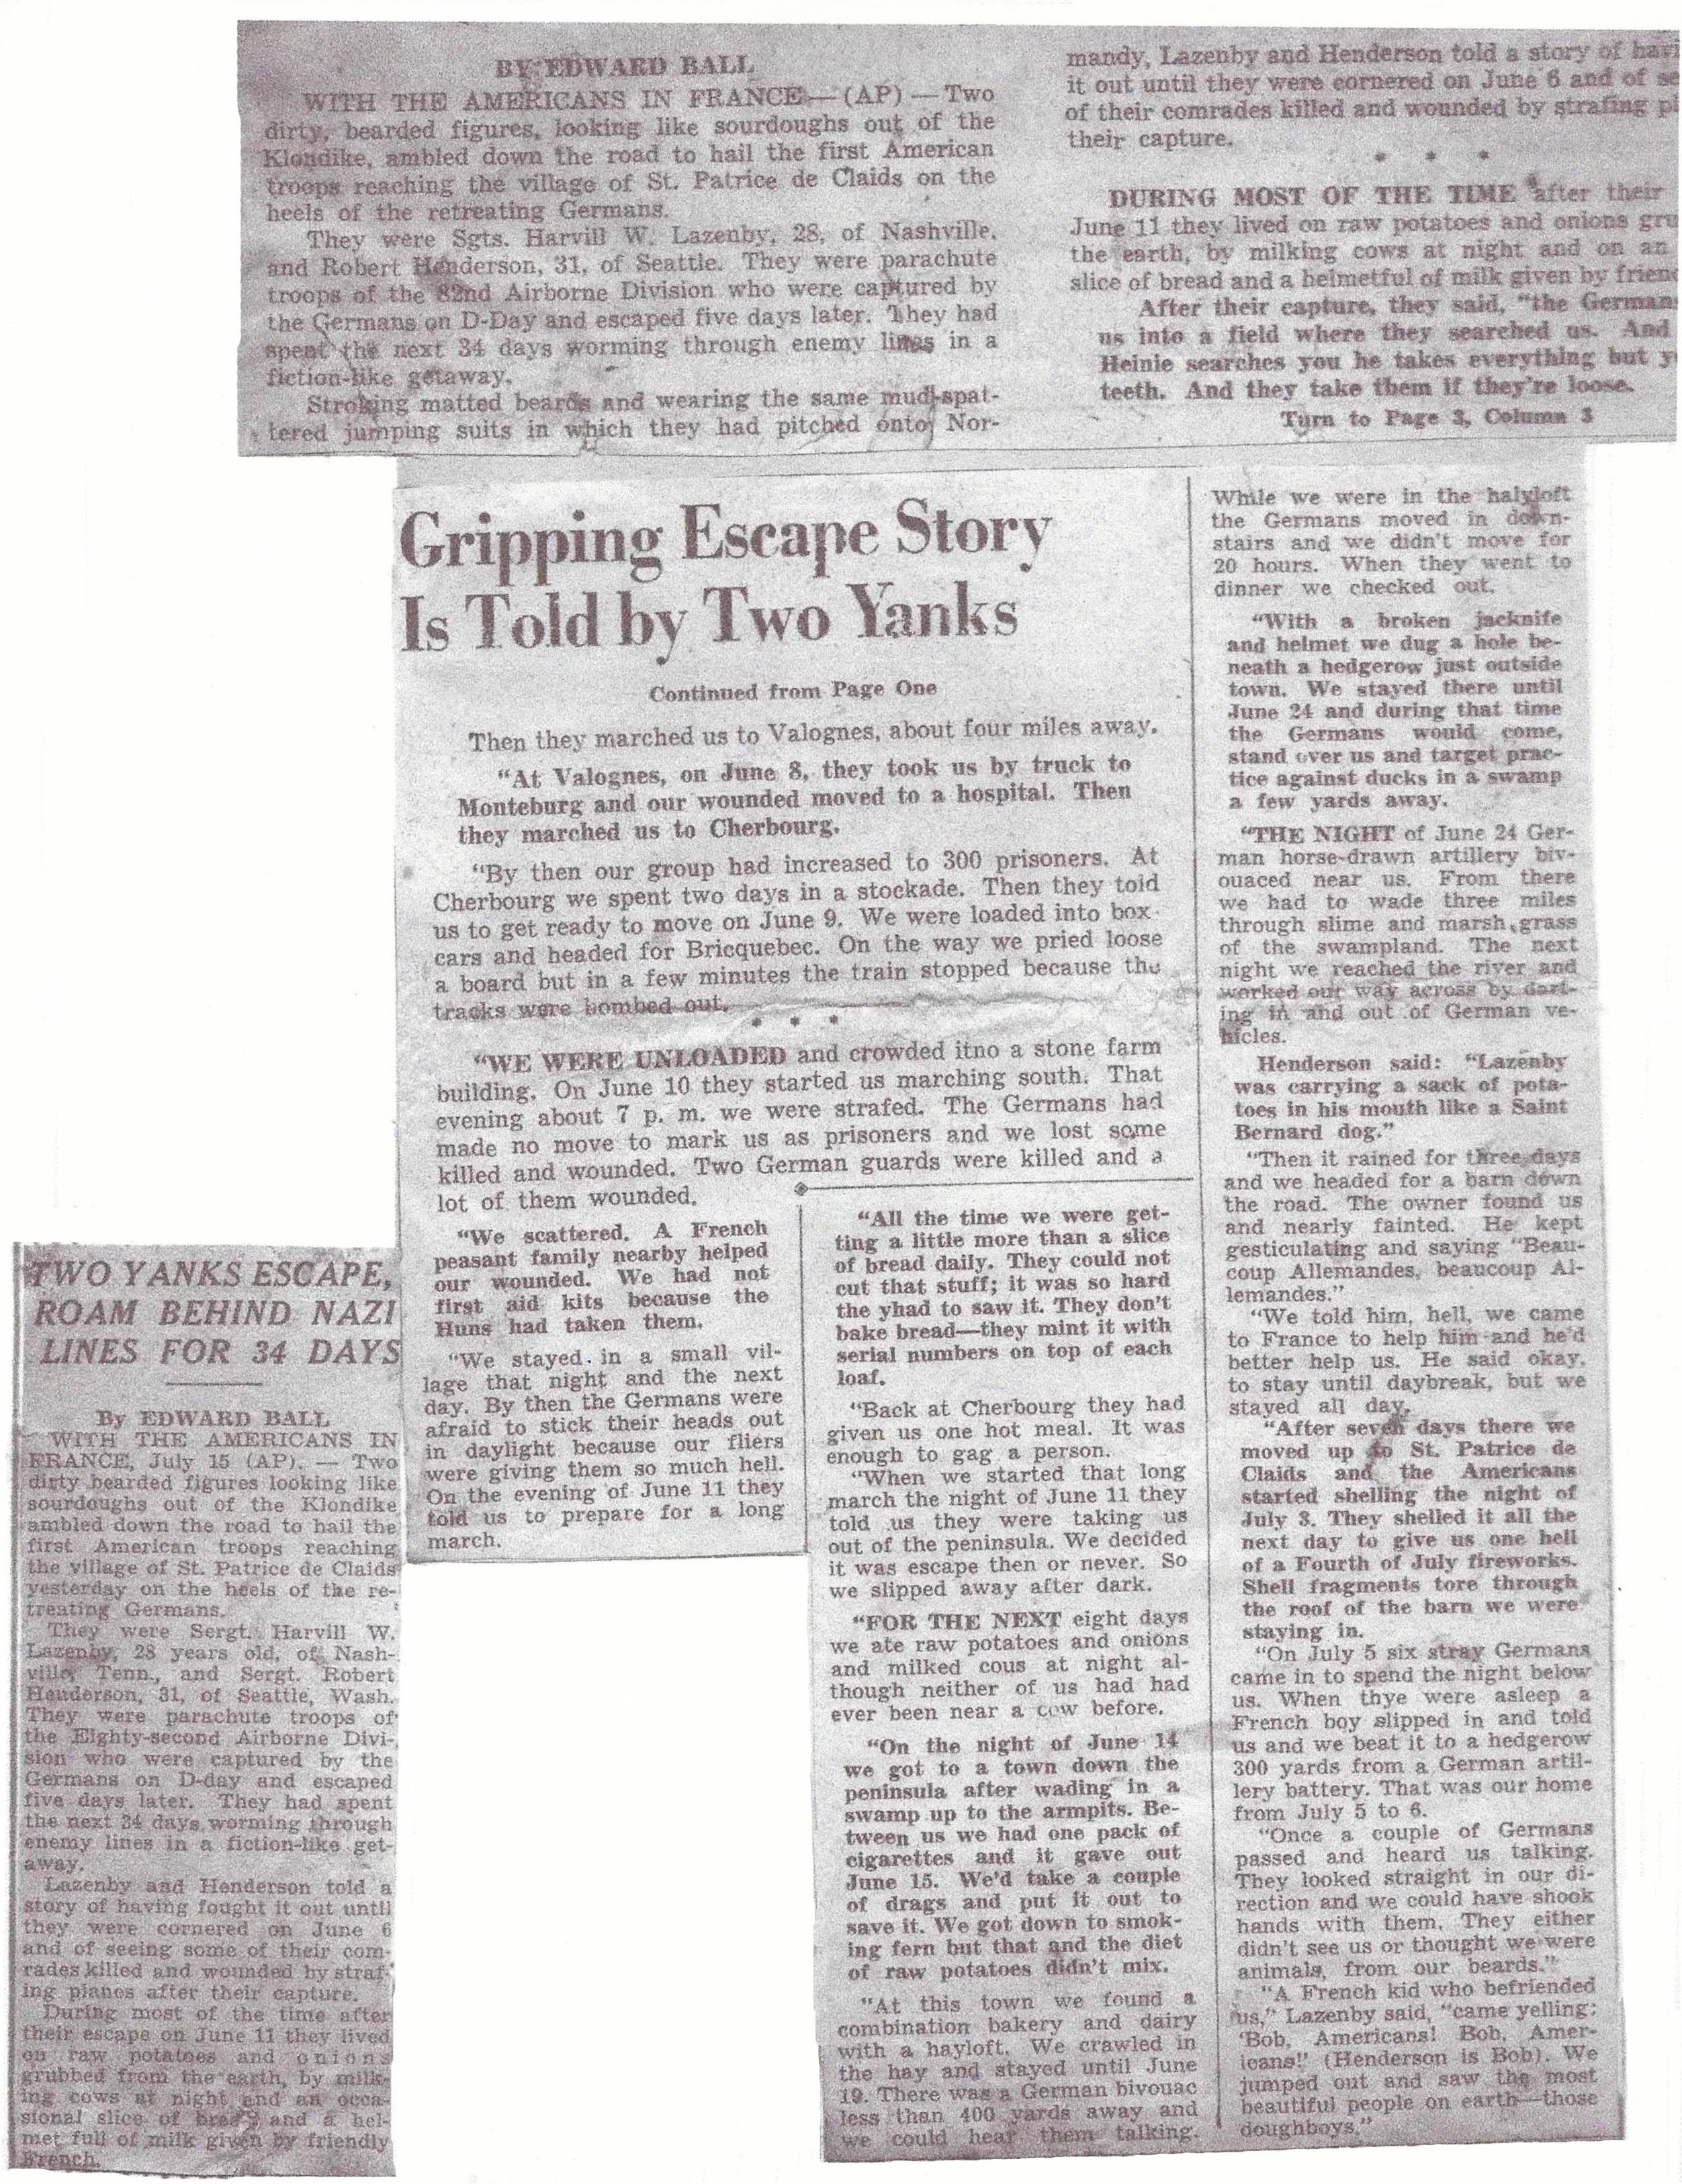 Sgt. Lazenby news clippings